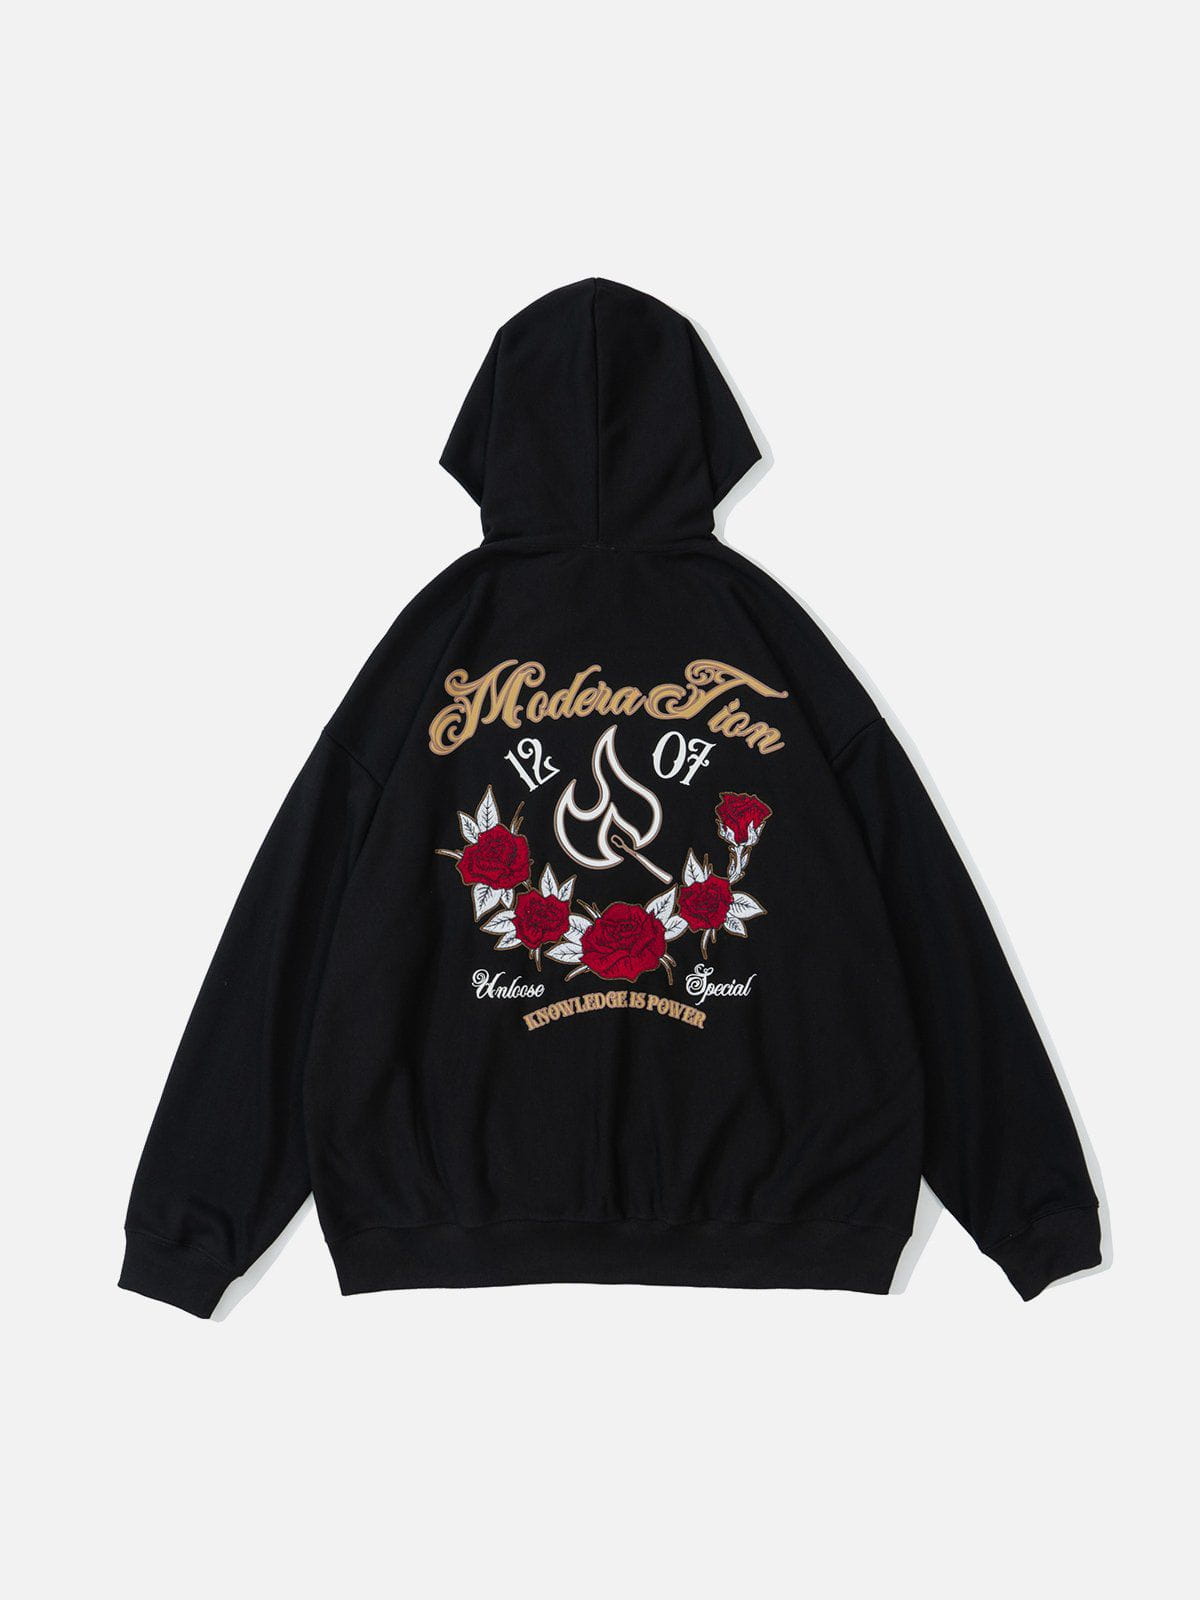 Eprezzy® - Flames and Roses Embroidered Hoodie Streetwear Fashion - eprezzy.com